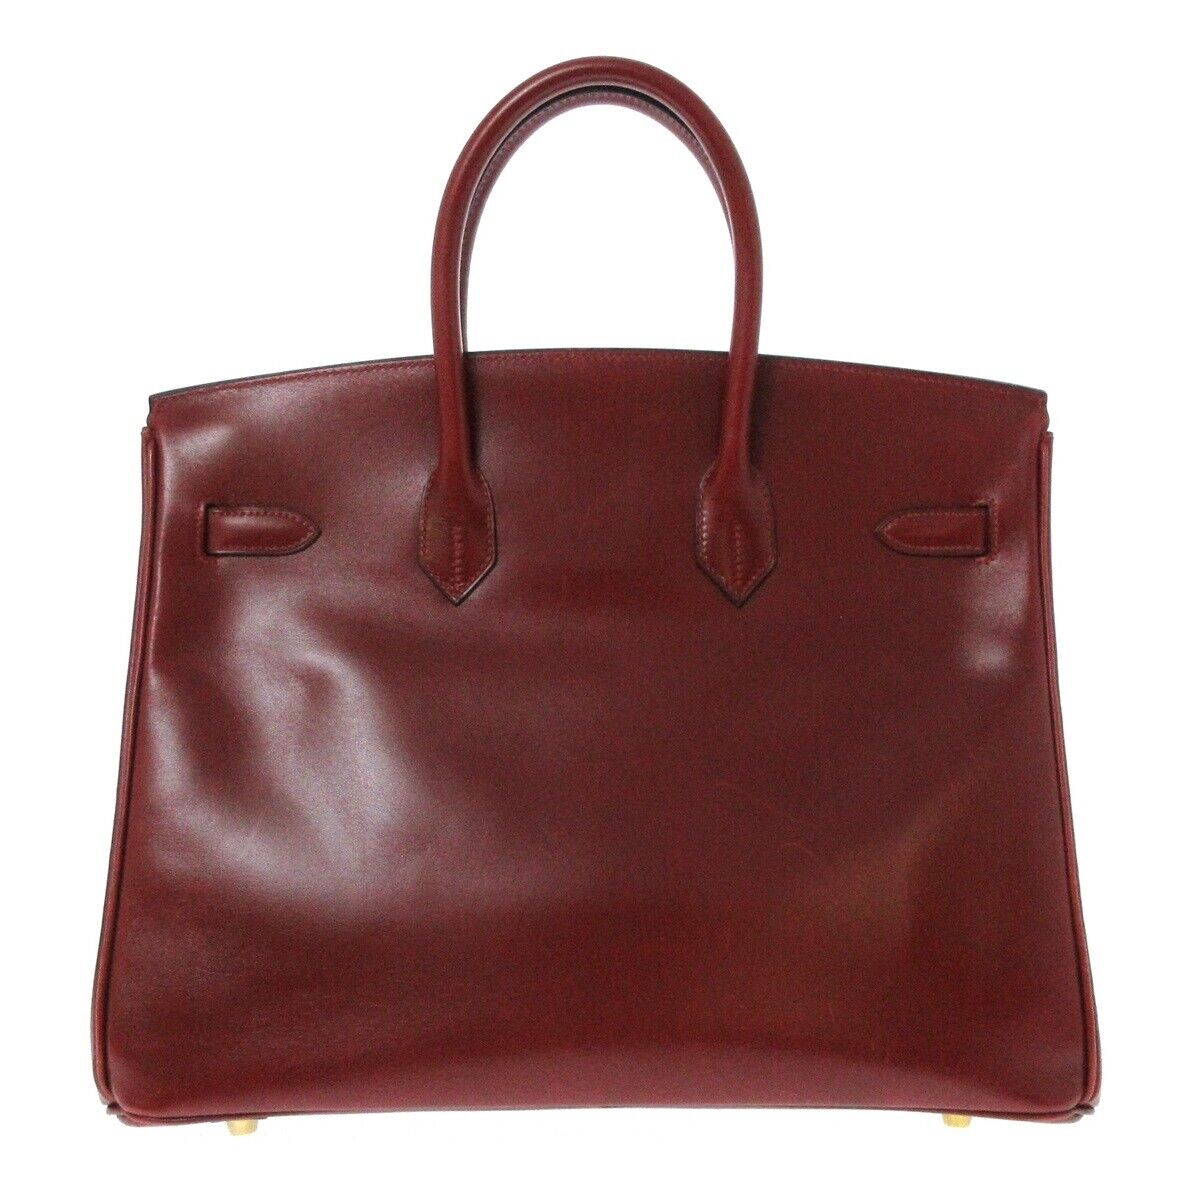 HERMES Birkin 35 - aptiques by Authentic PreOwned